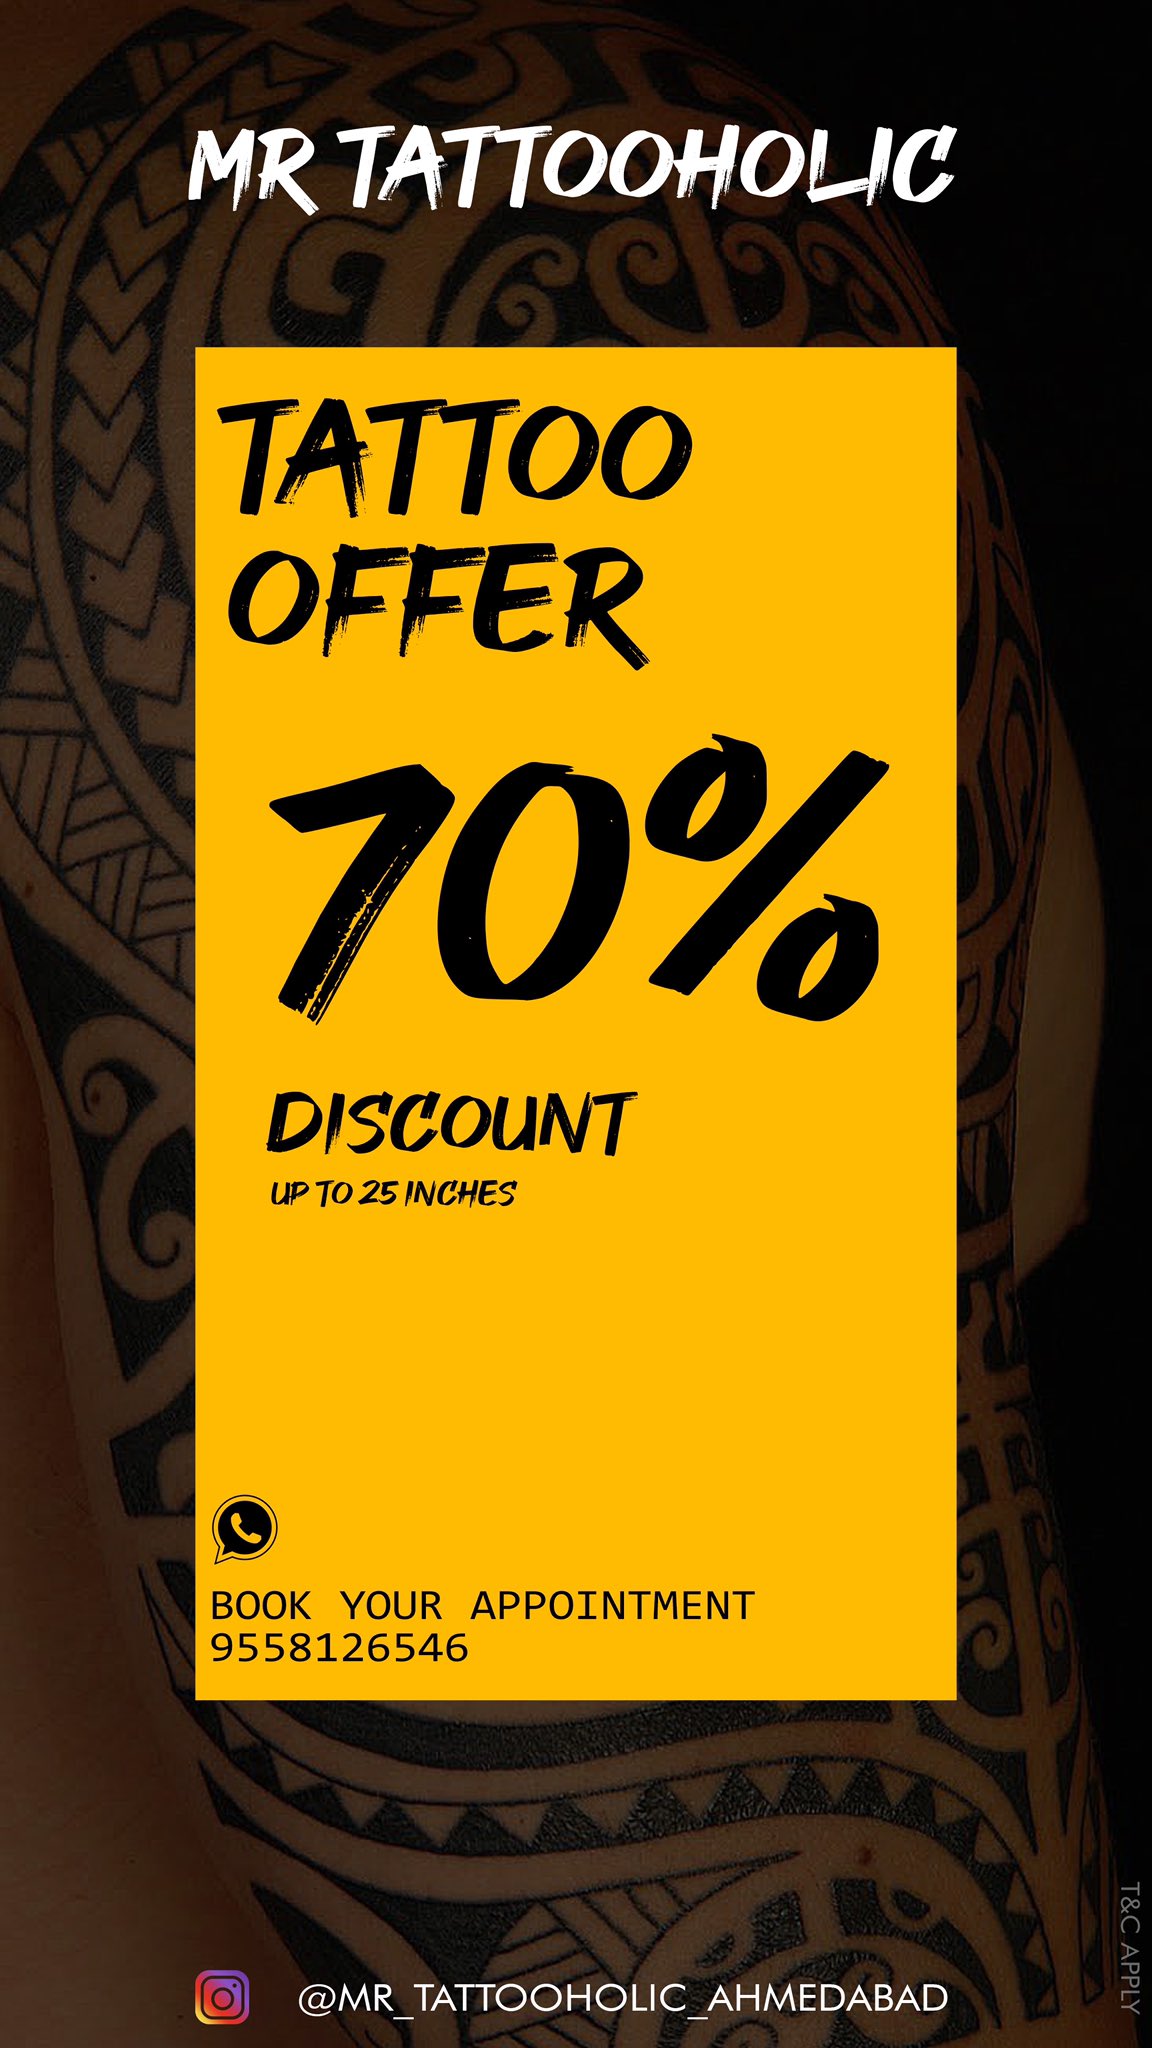 Tattoo Studio Offer with Tattooed Arm Online Poster Template - VistaCreate